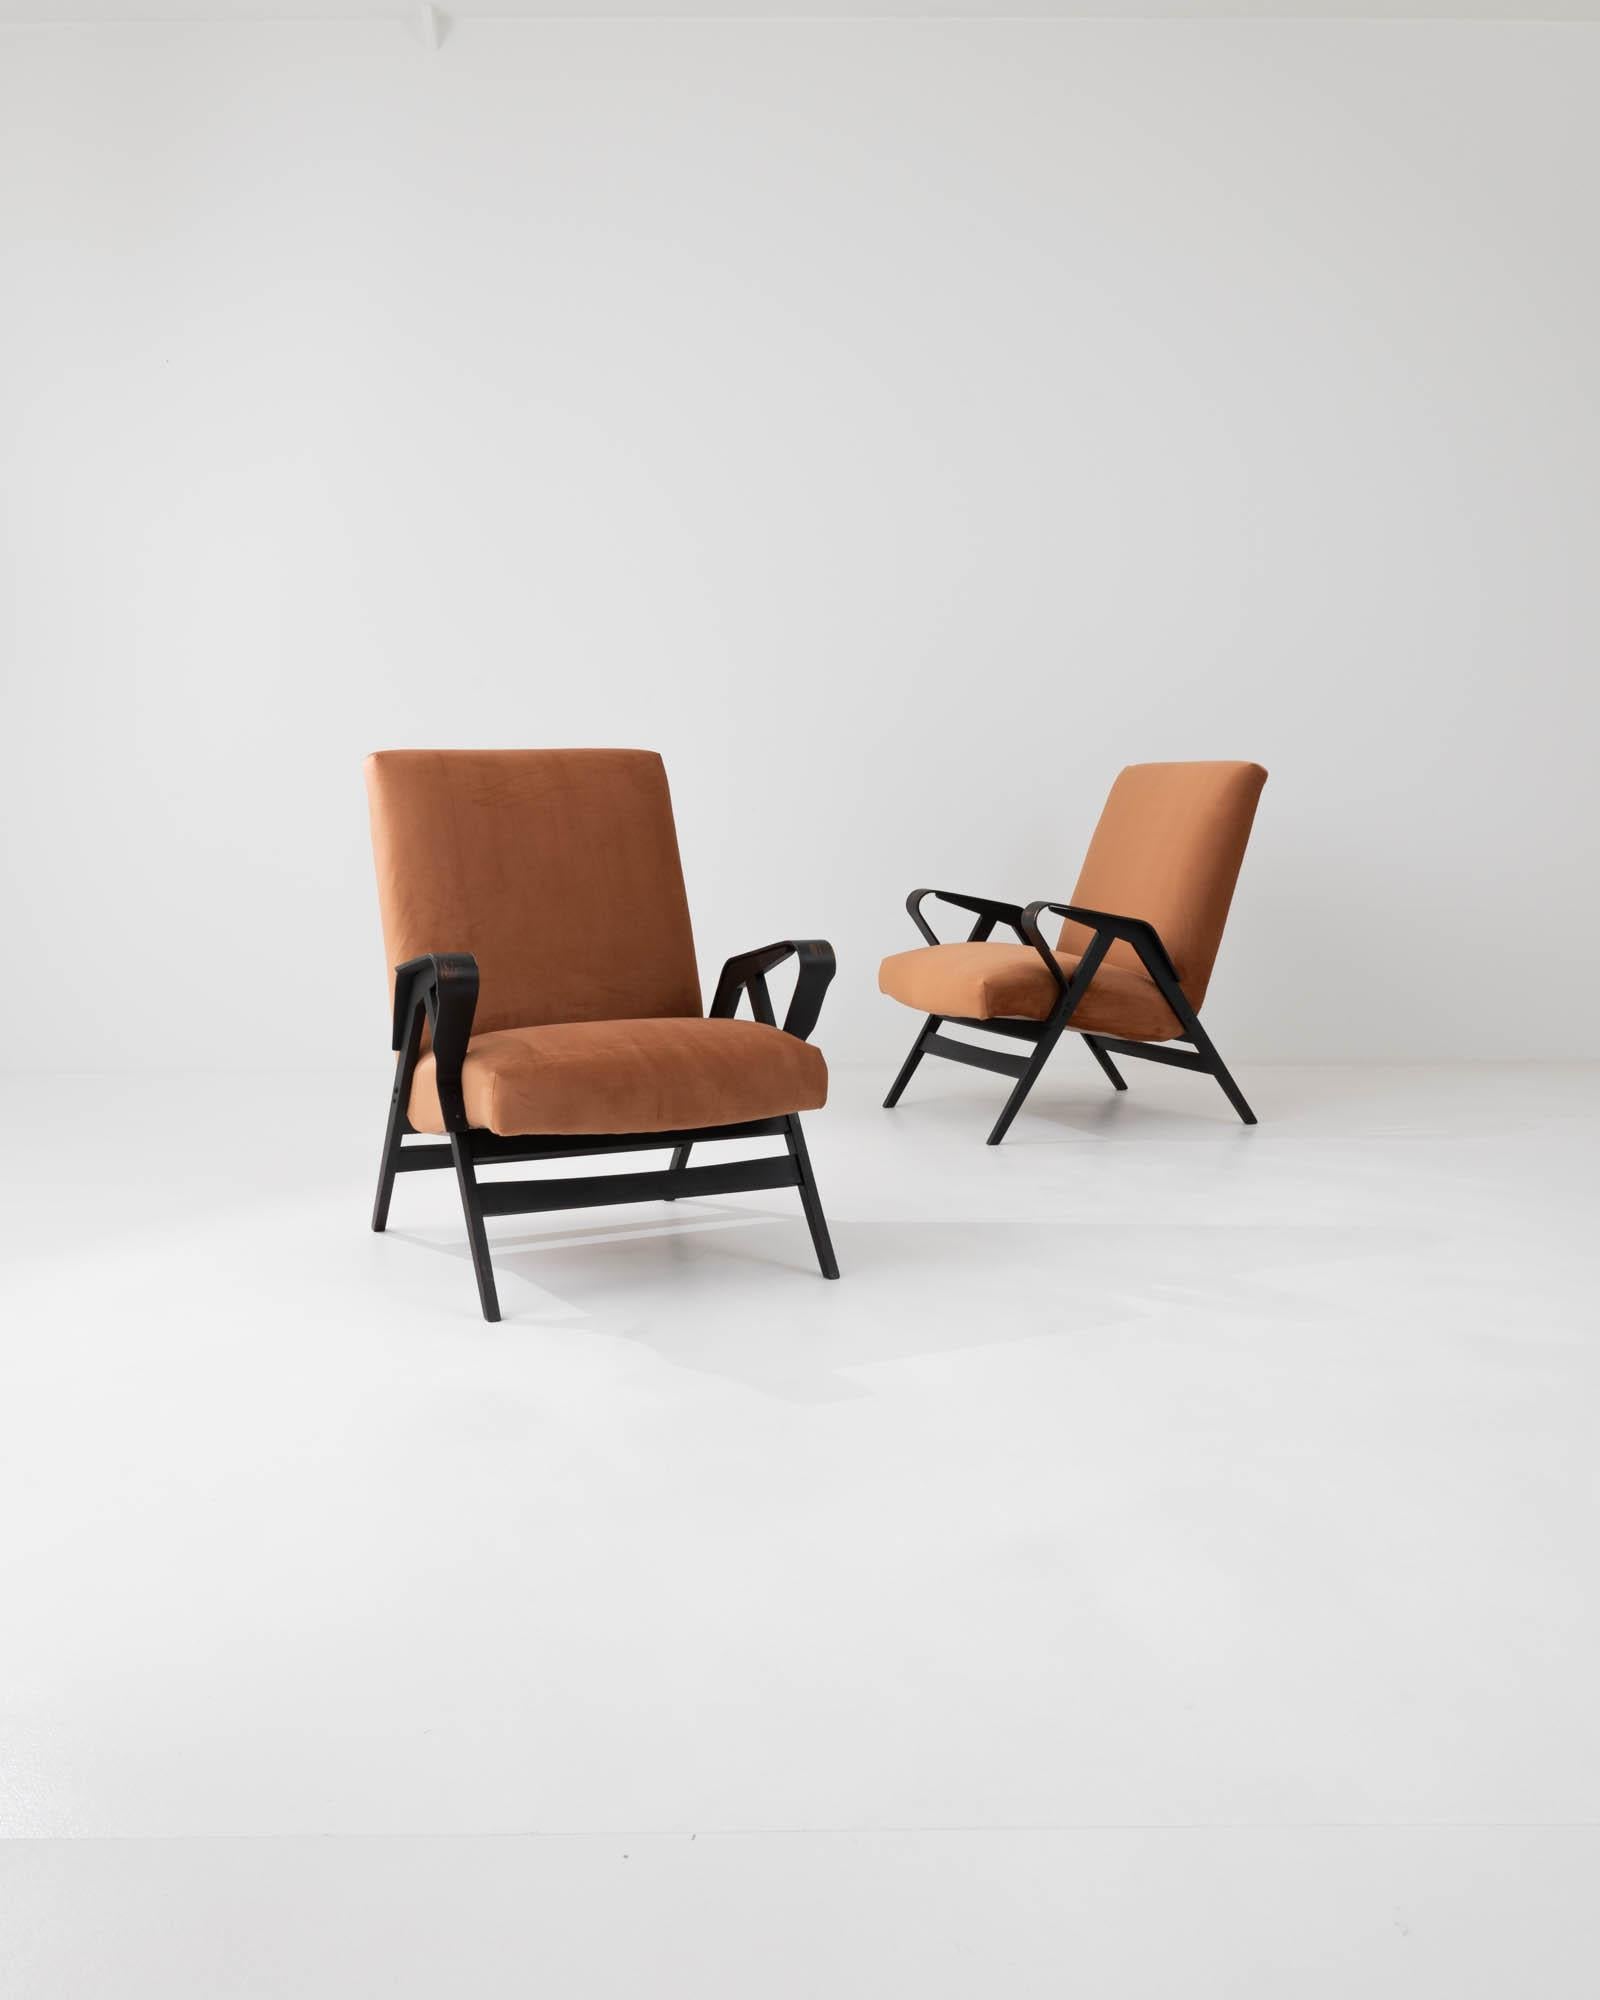 Characterized by the clean lines that define their minimalist silhouette, these armchairs were crafted by the iconic Czech brand, with the design attributed to František Jirák, in the 1960s. The smooth, contoured surfaces of the bentwood arms engage